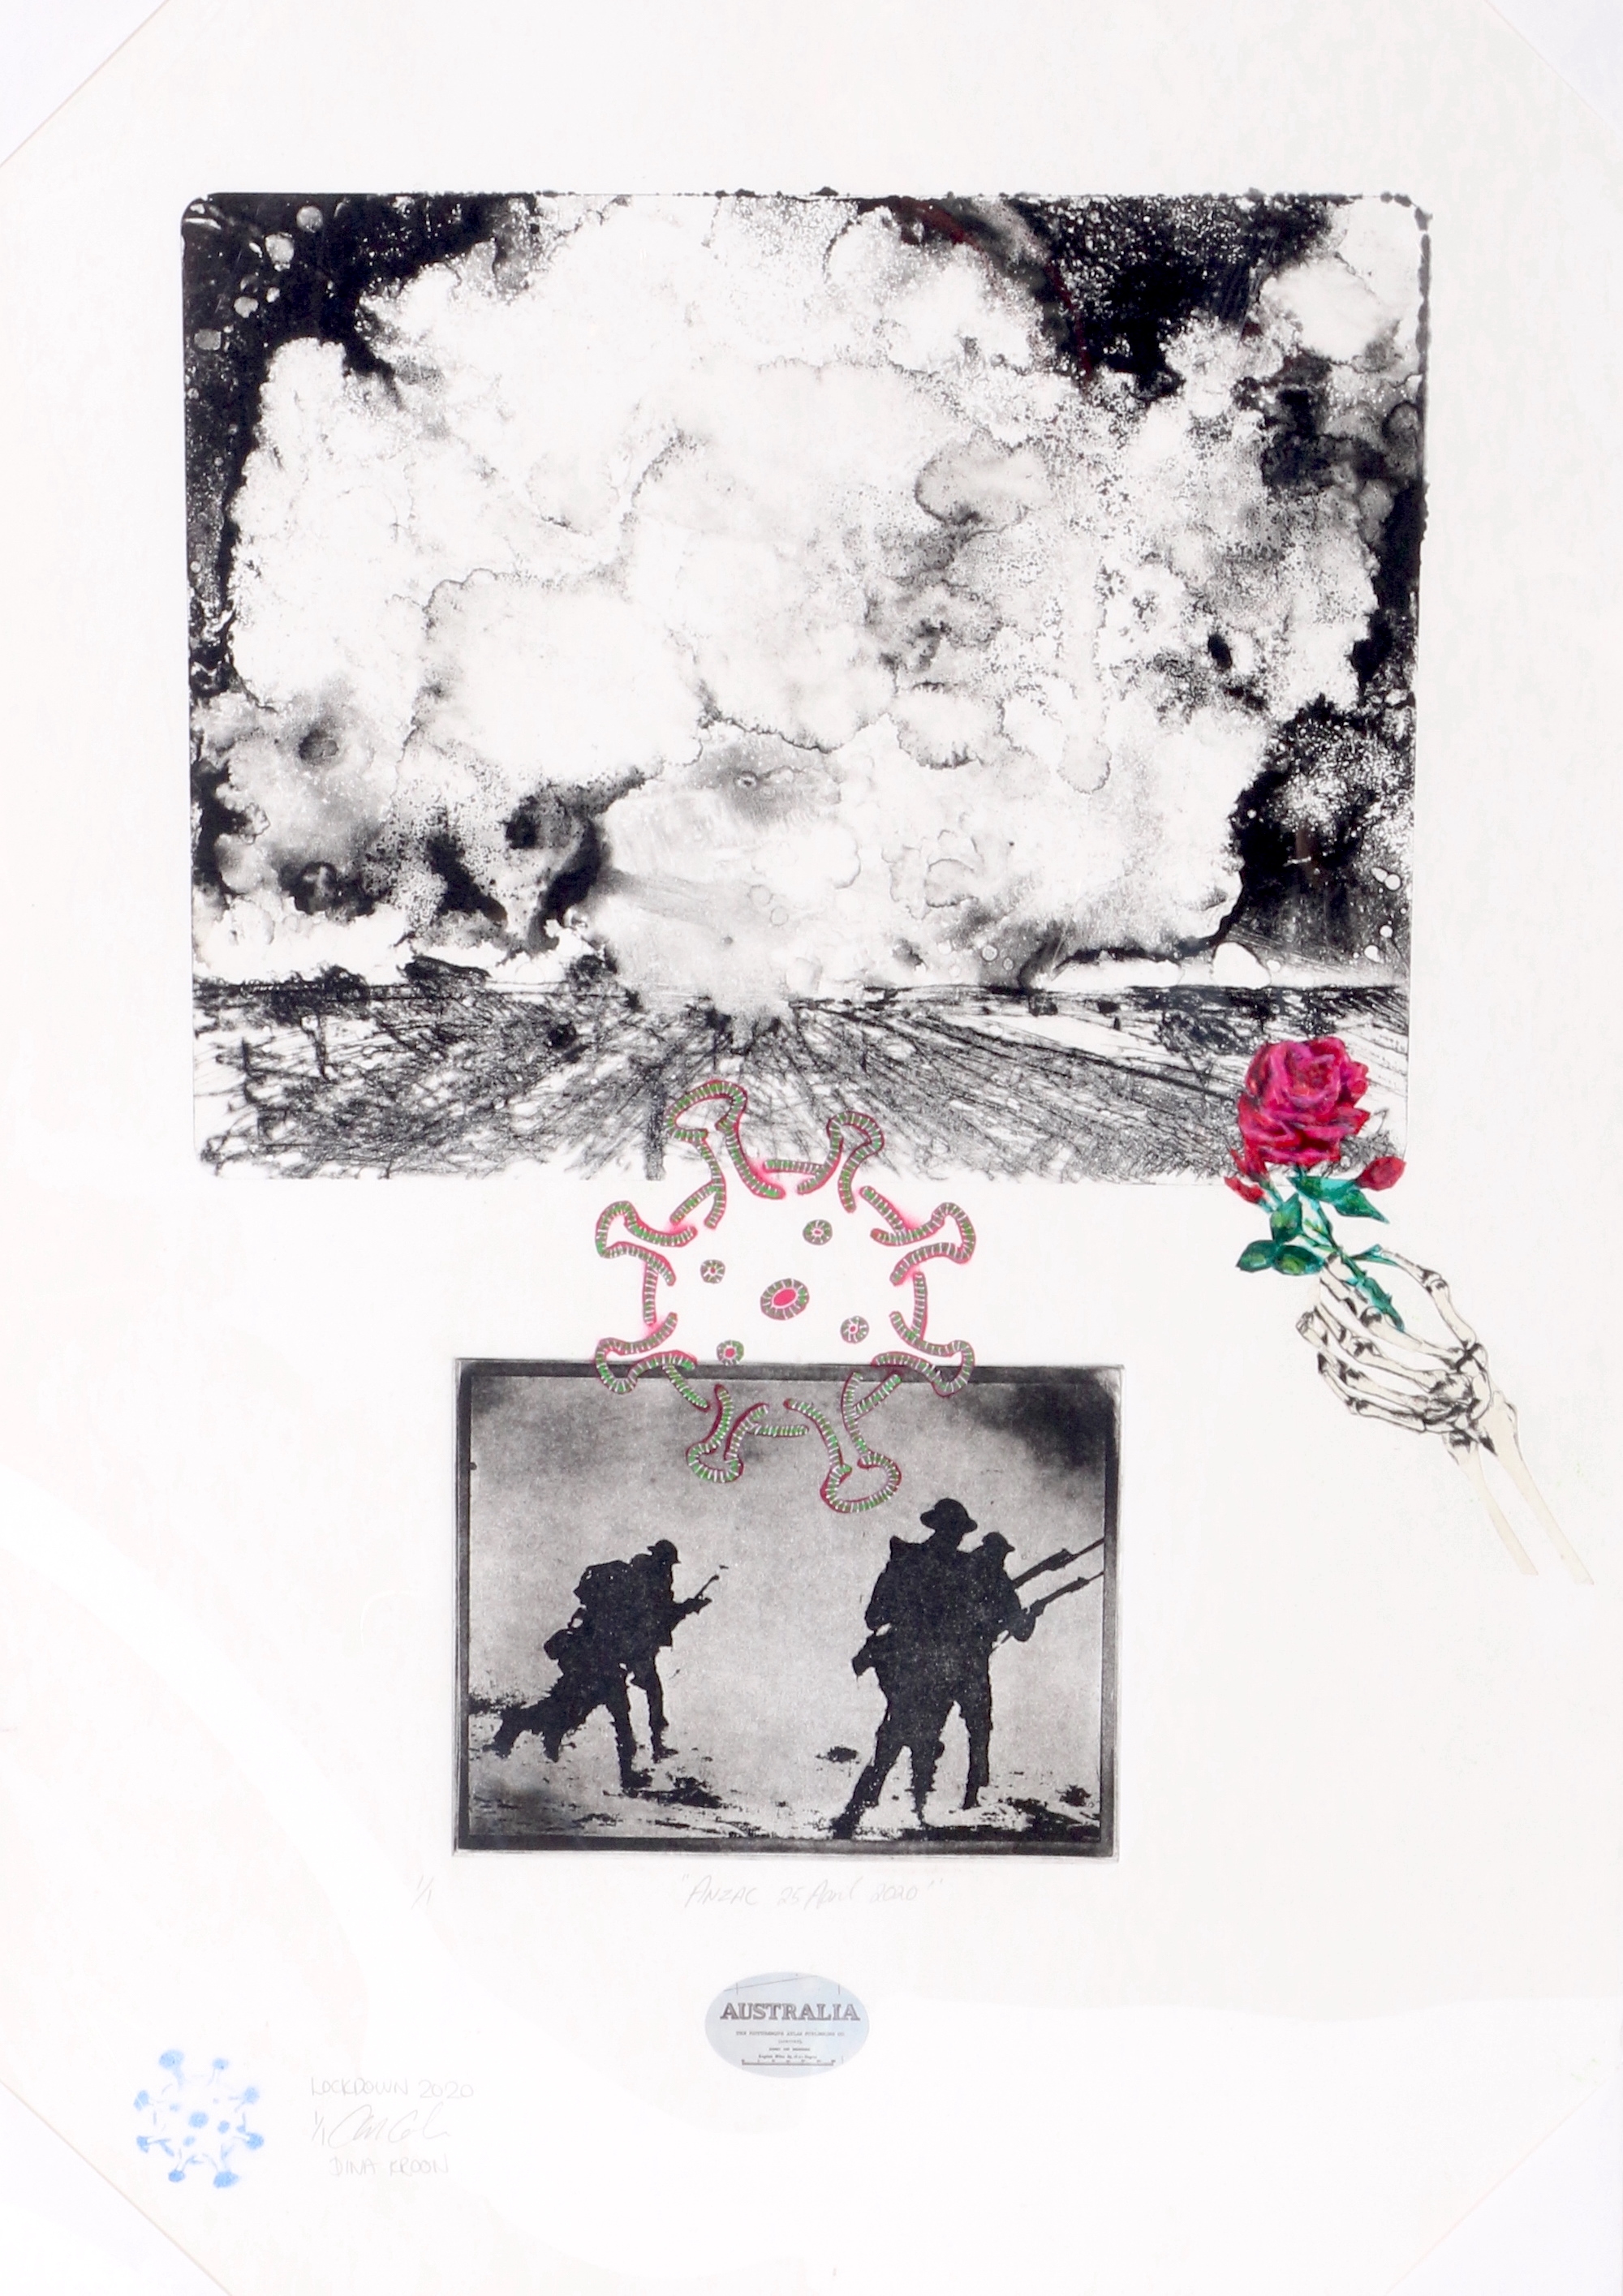 Artwork by Collin Cole, Dina Kroon, ANZAC 25 APRIL 2020, Made of drypoint